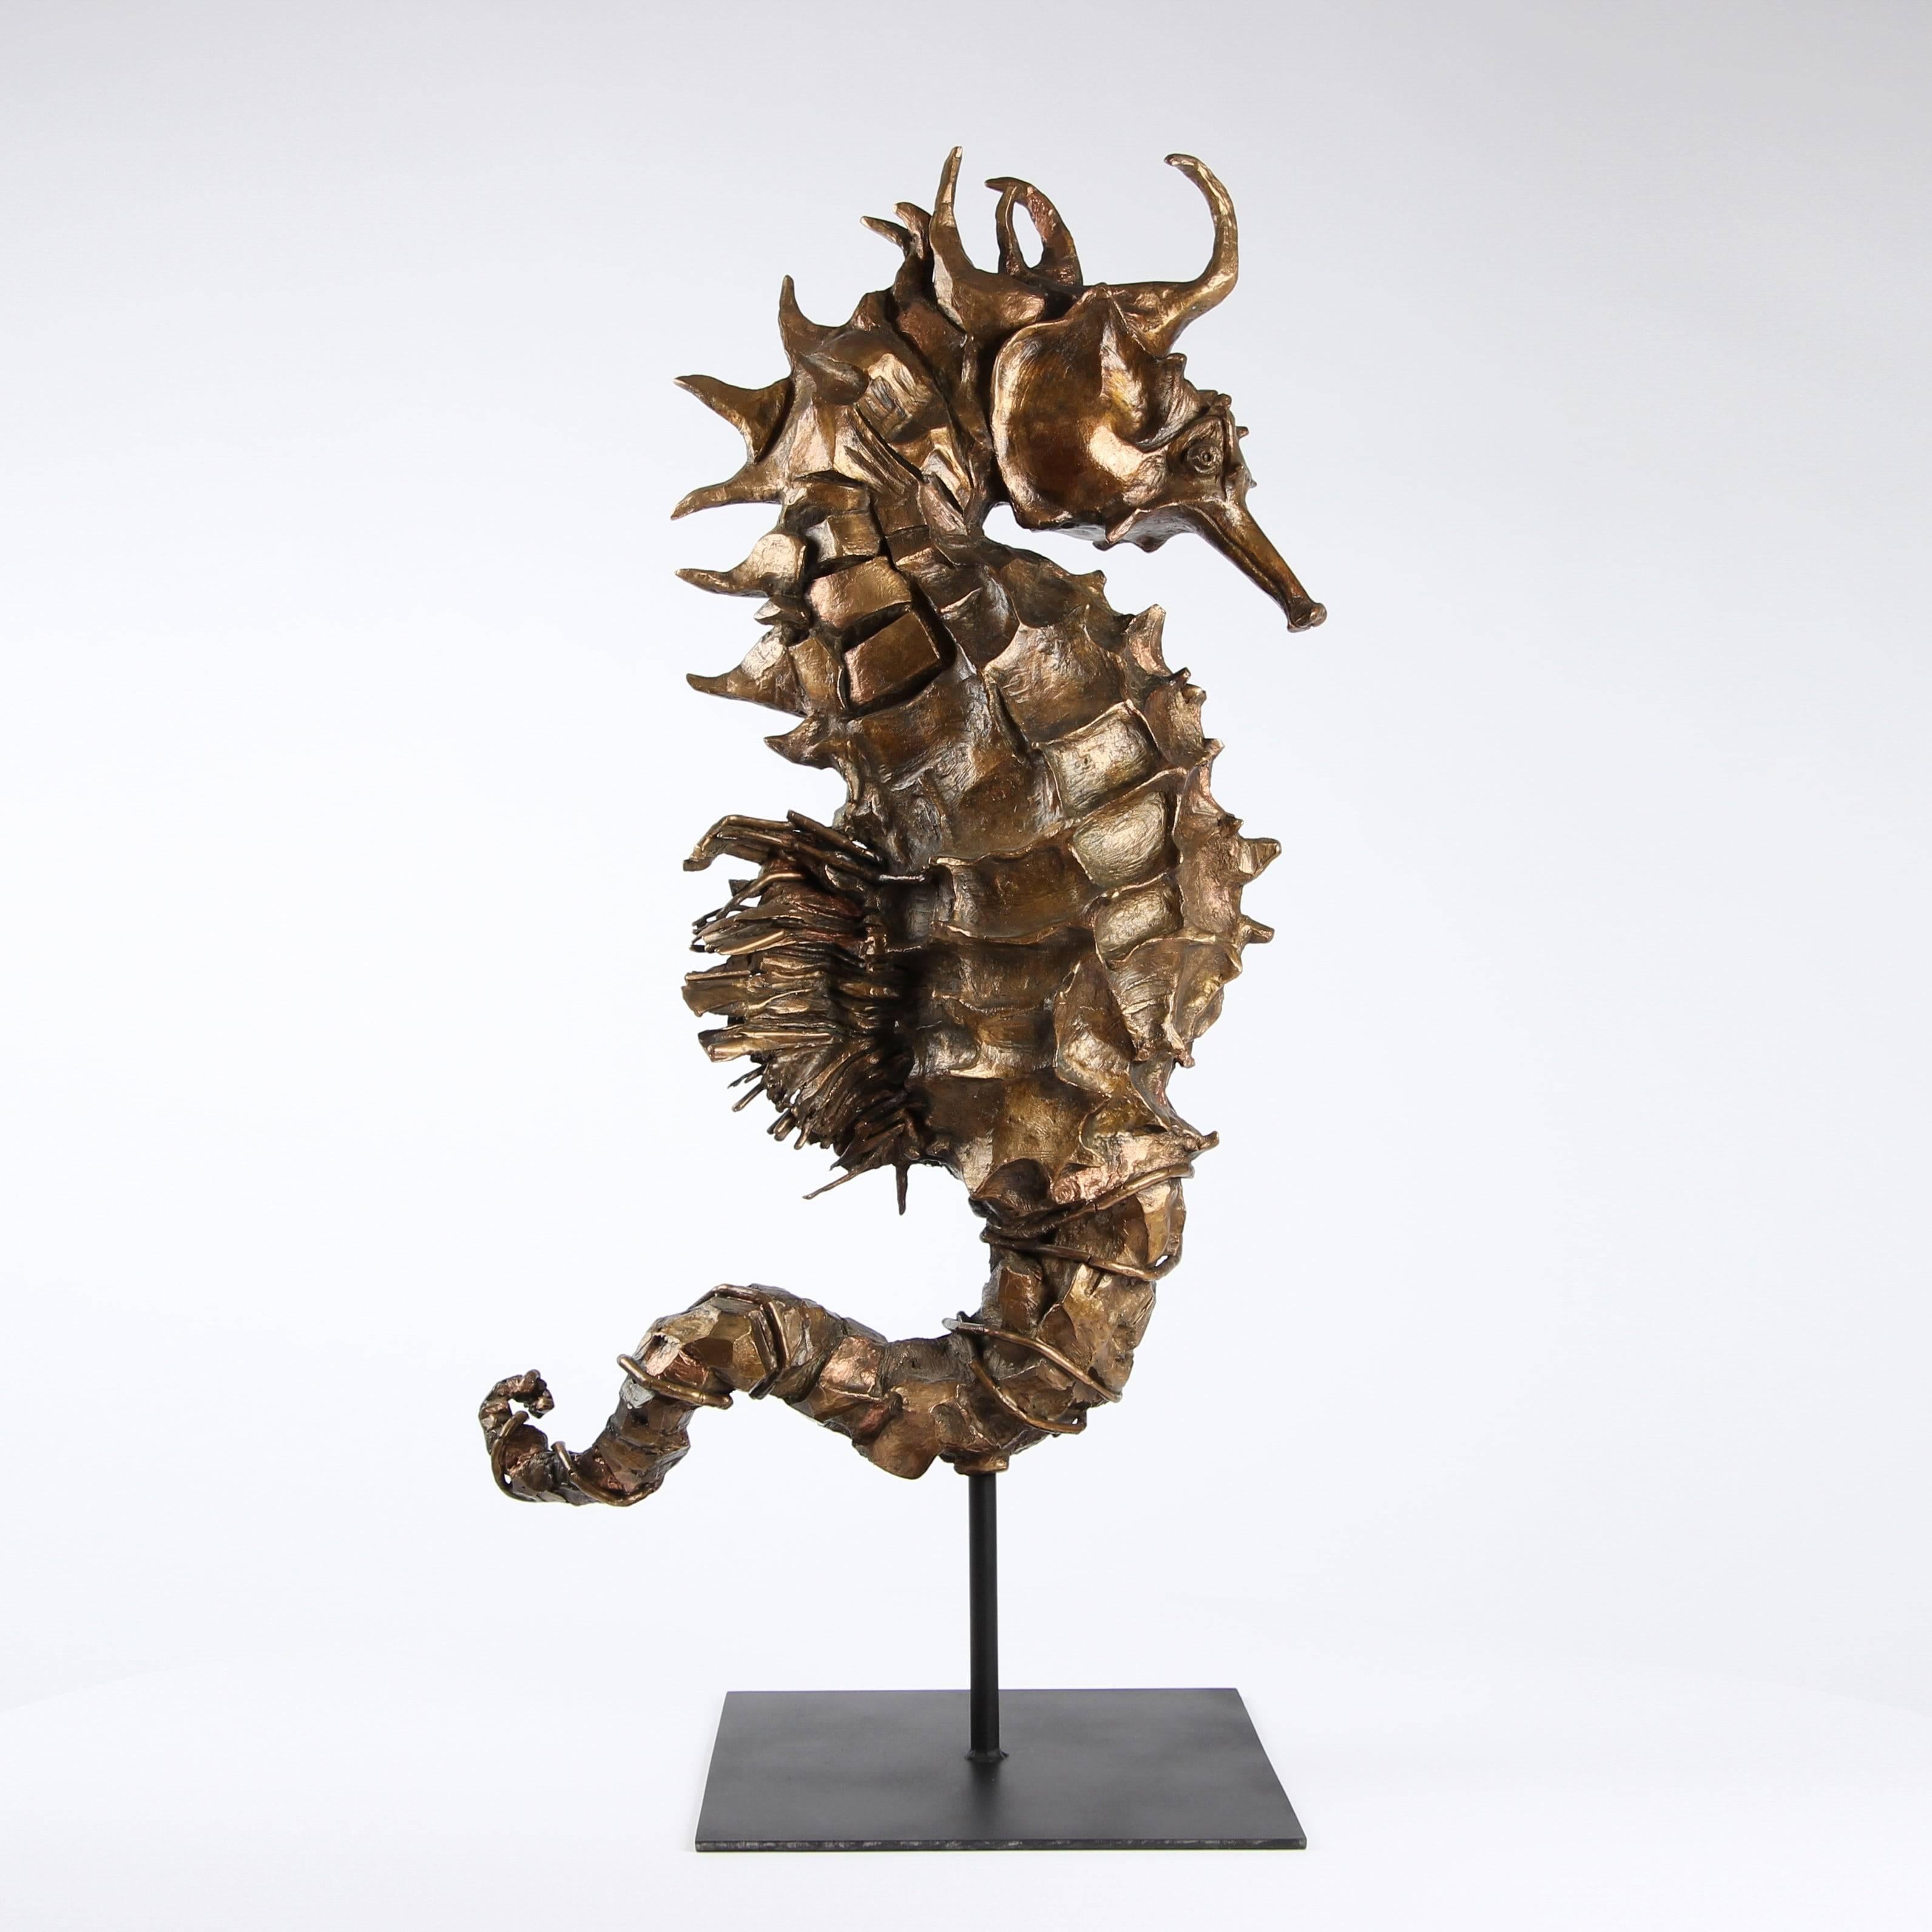 Seahorse Rex Gold is a 1-meter high bronze sculpture by French contemporary artist Chésade. This one-off sculpture is representative of the sculptor's interest in the marine world. 103 cm × 55 cm × 22 cm.
The graceful and suspended “Seahorse” is